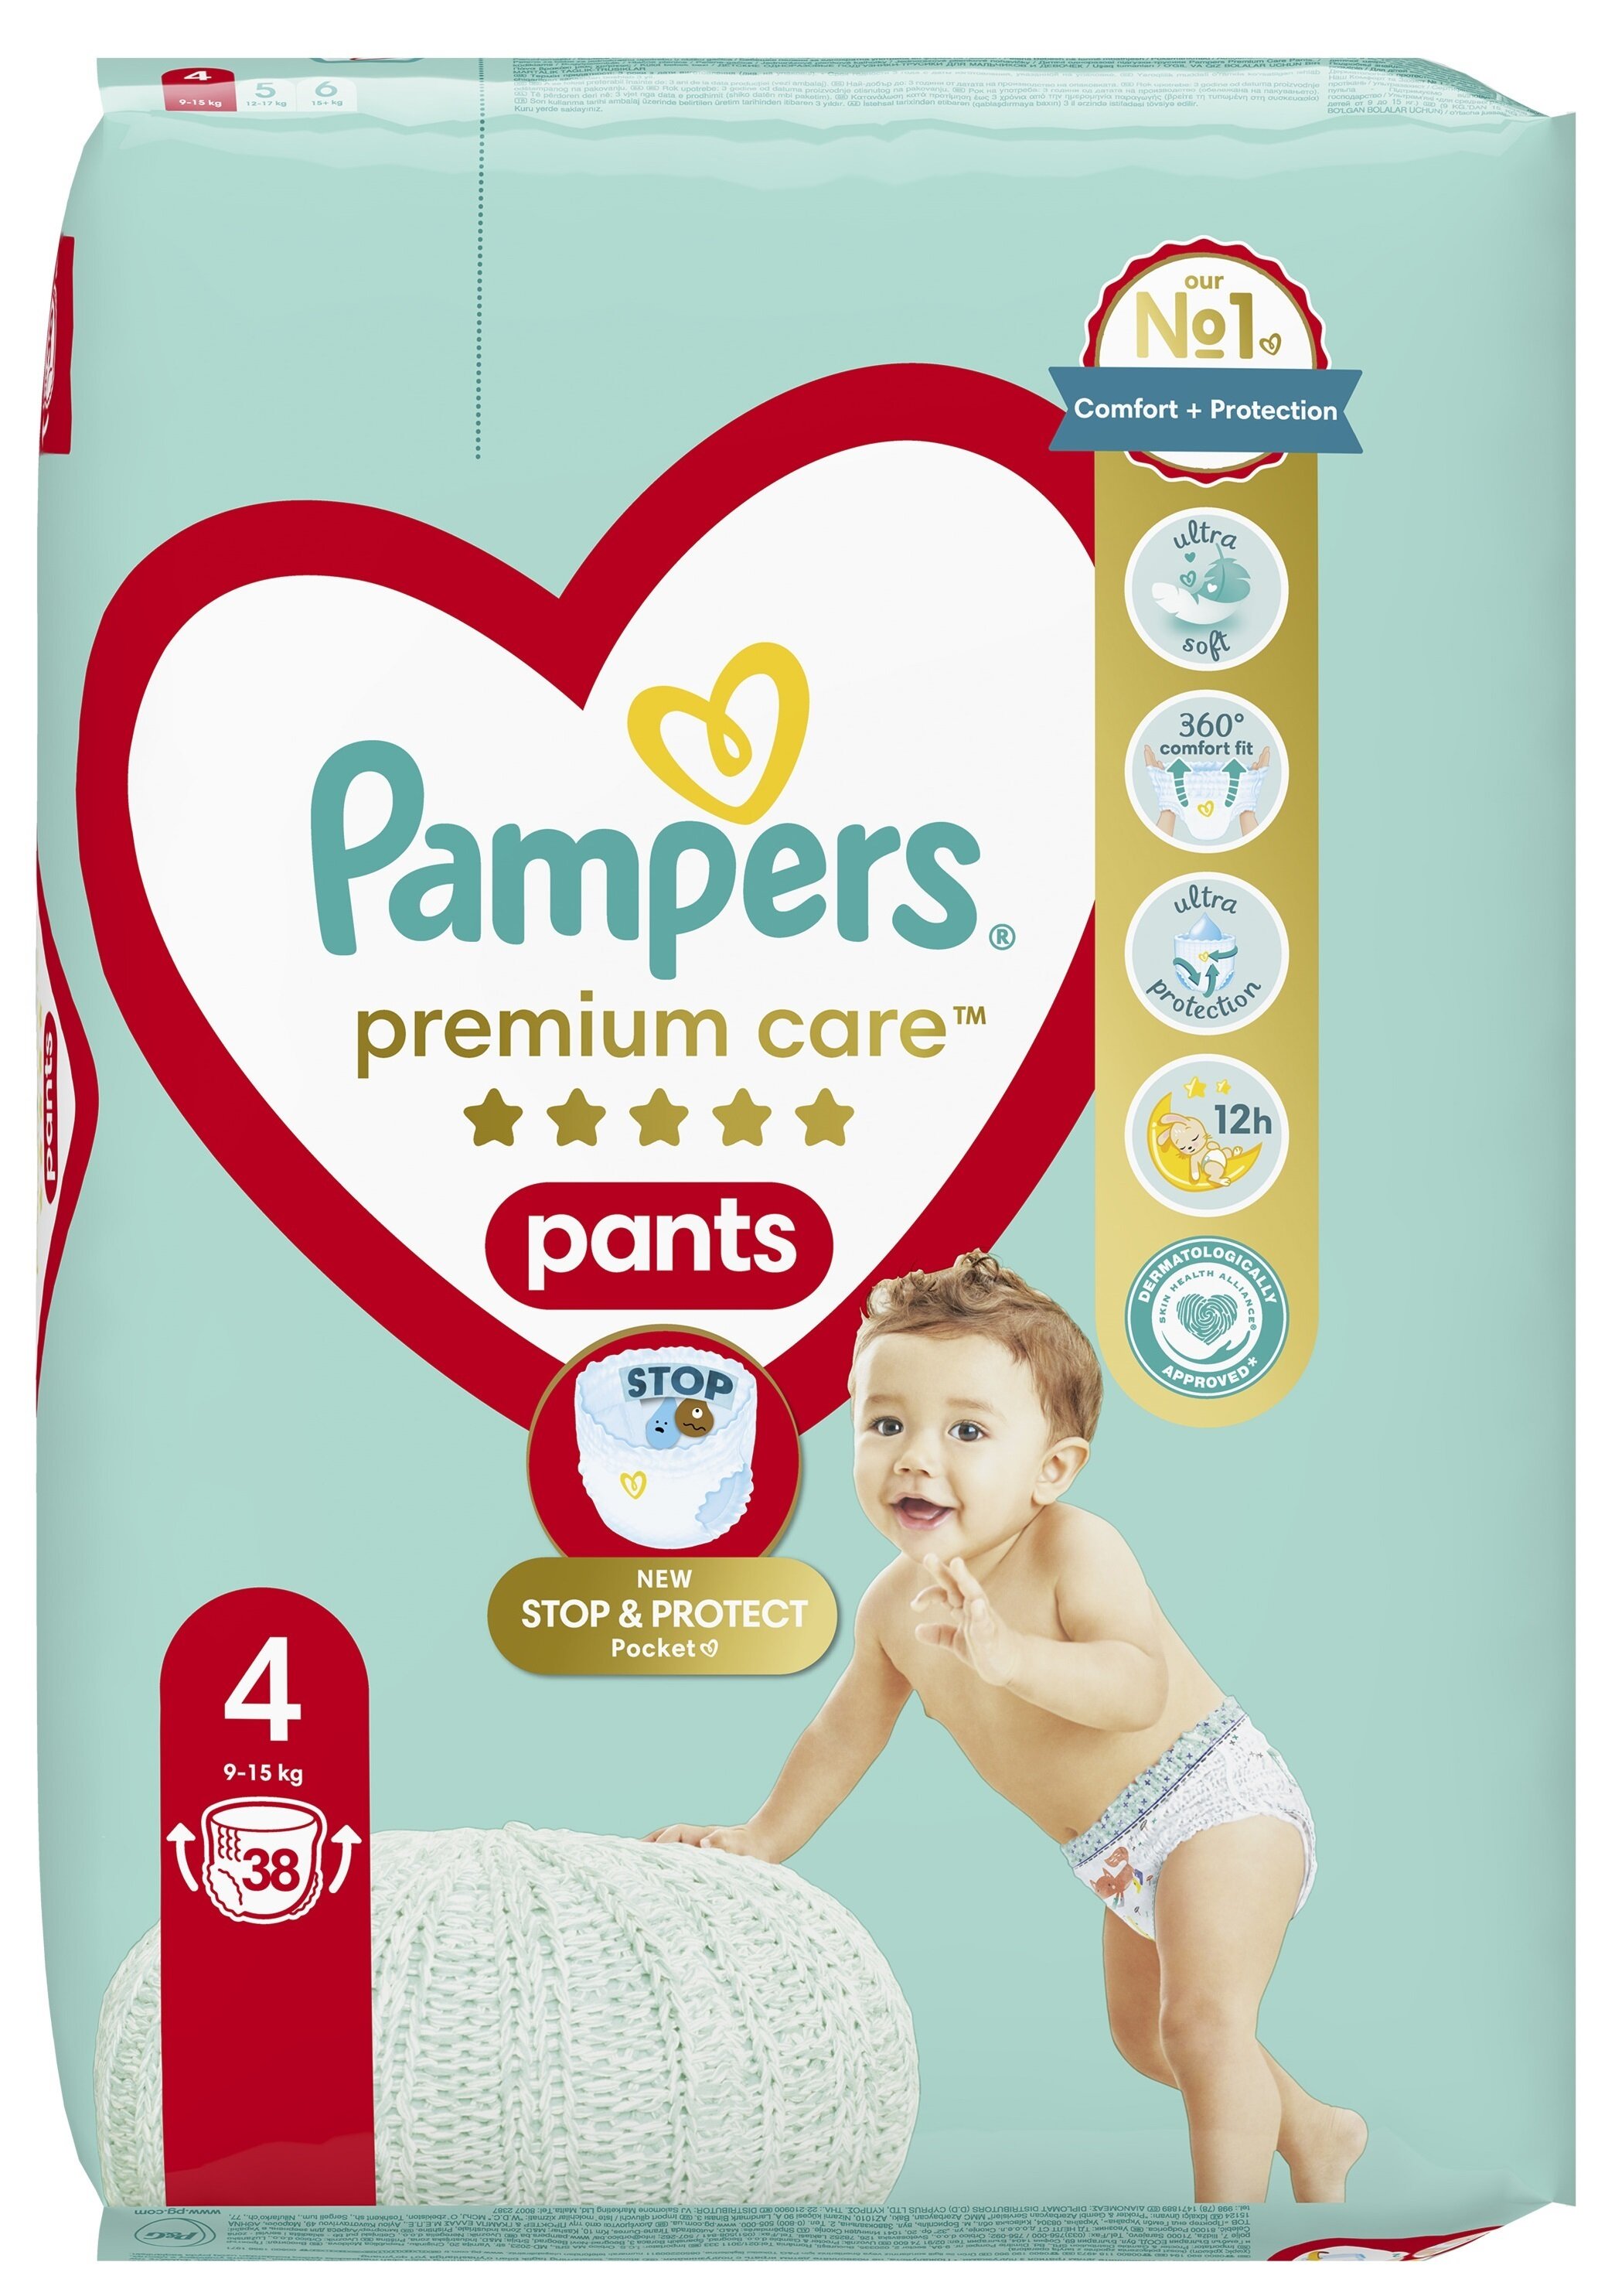 49 szt pampers 4